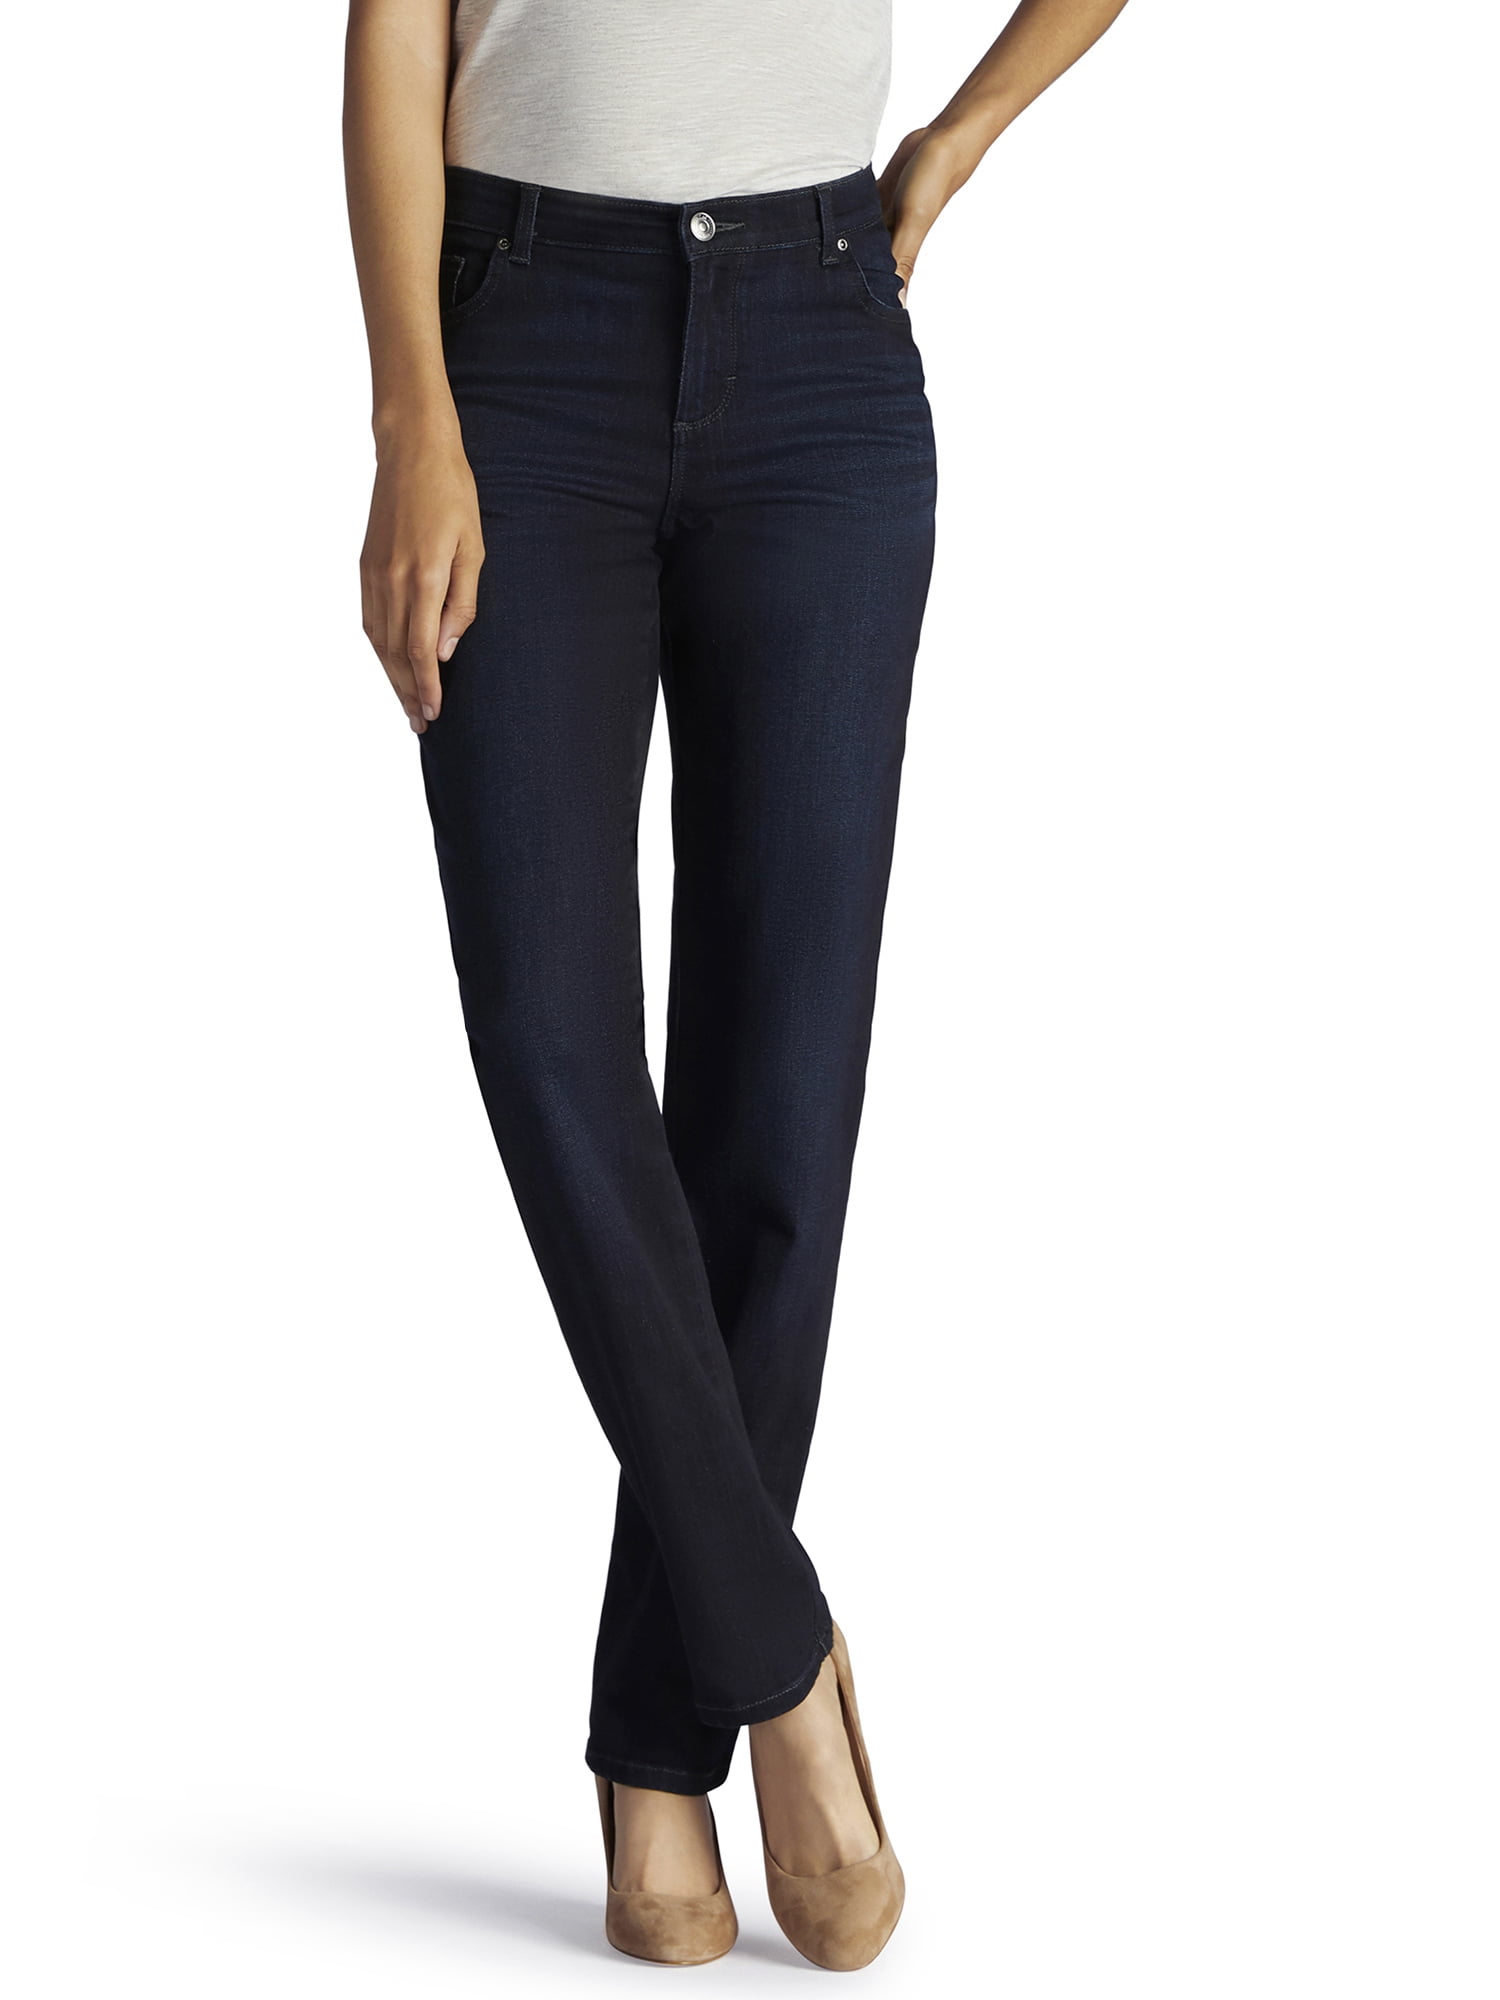 Lee Women's Relaxed Fit Straight Leg Jean